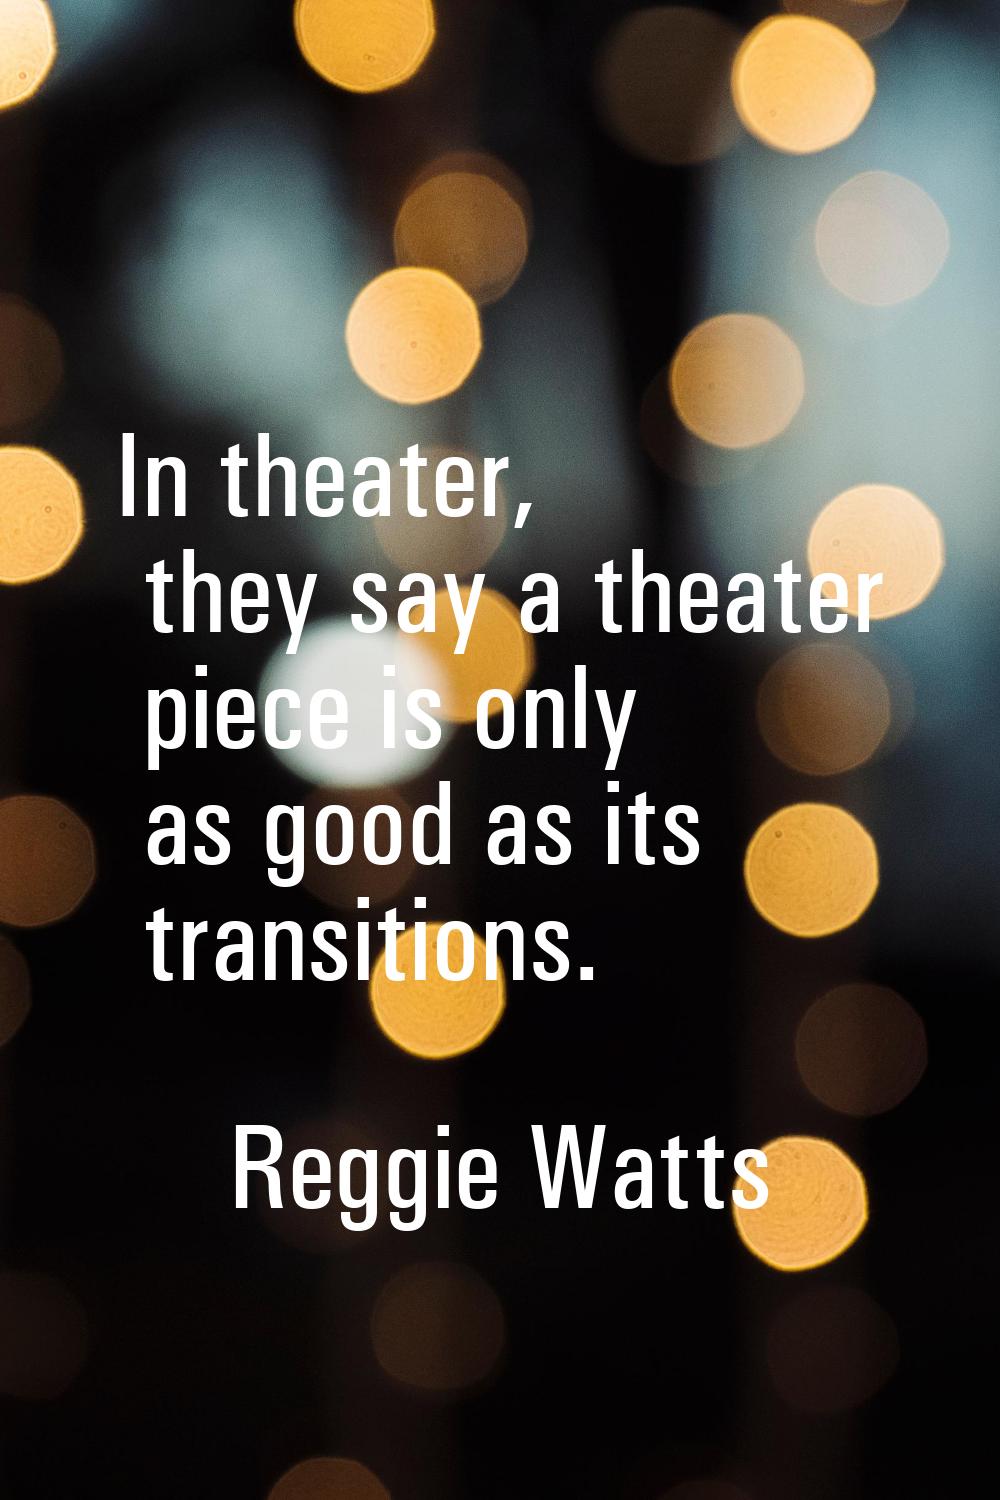 In theater, they say a theater piece is only as good as its transitions.